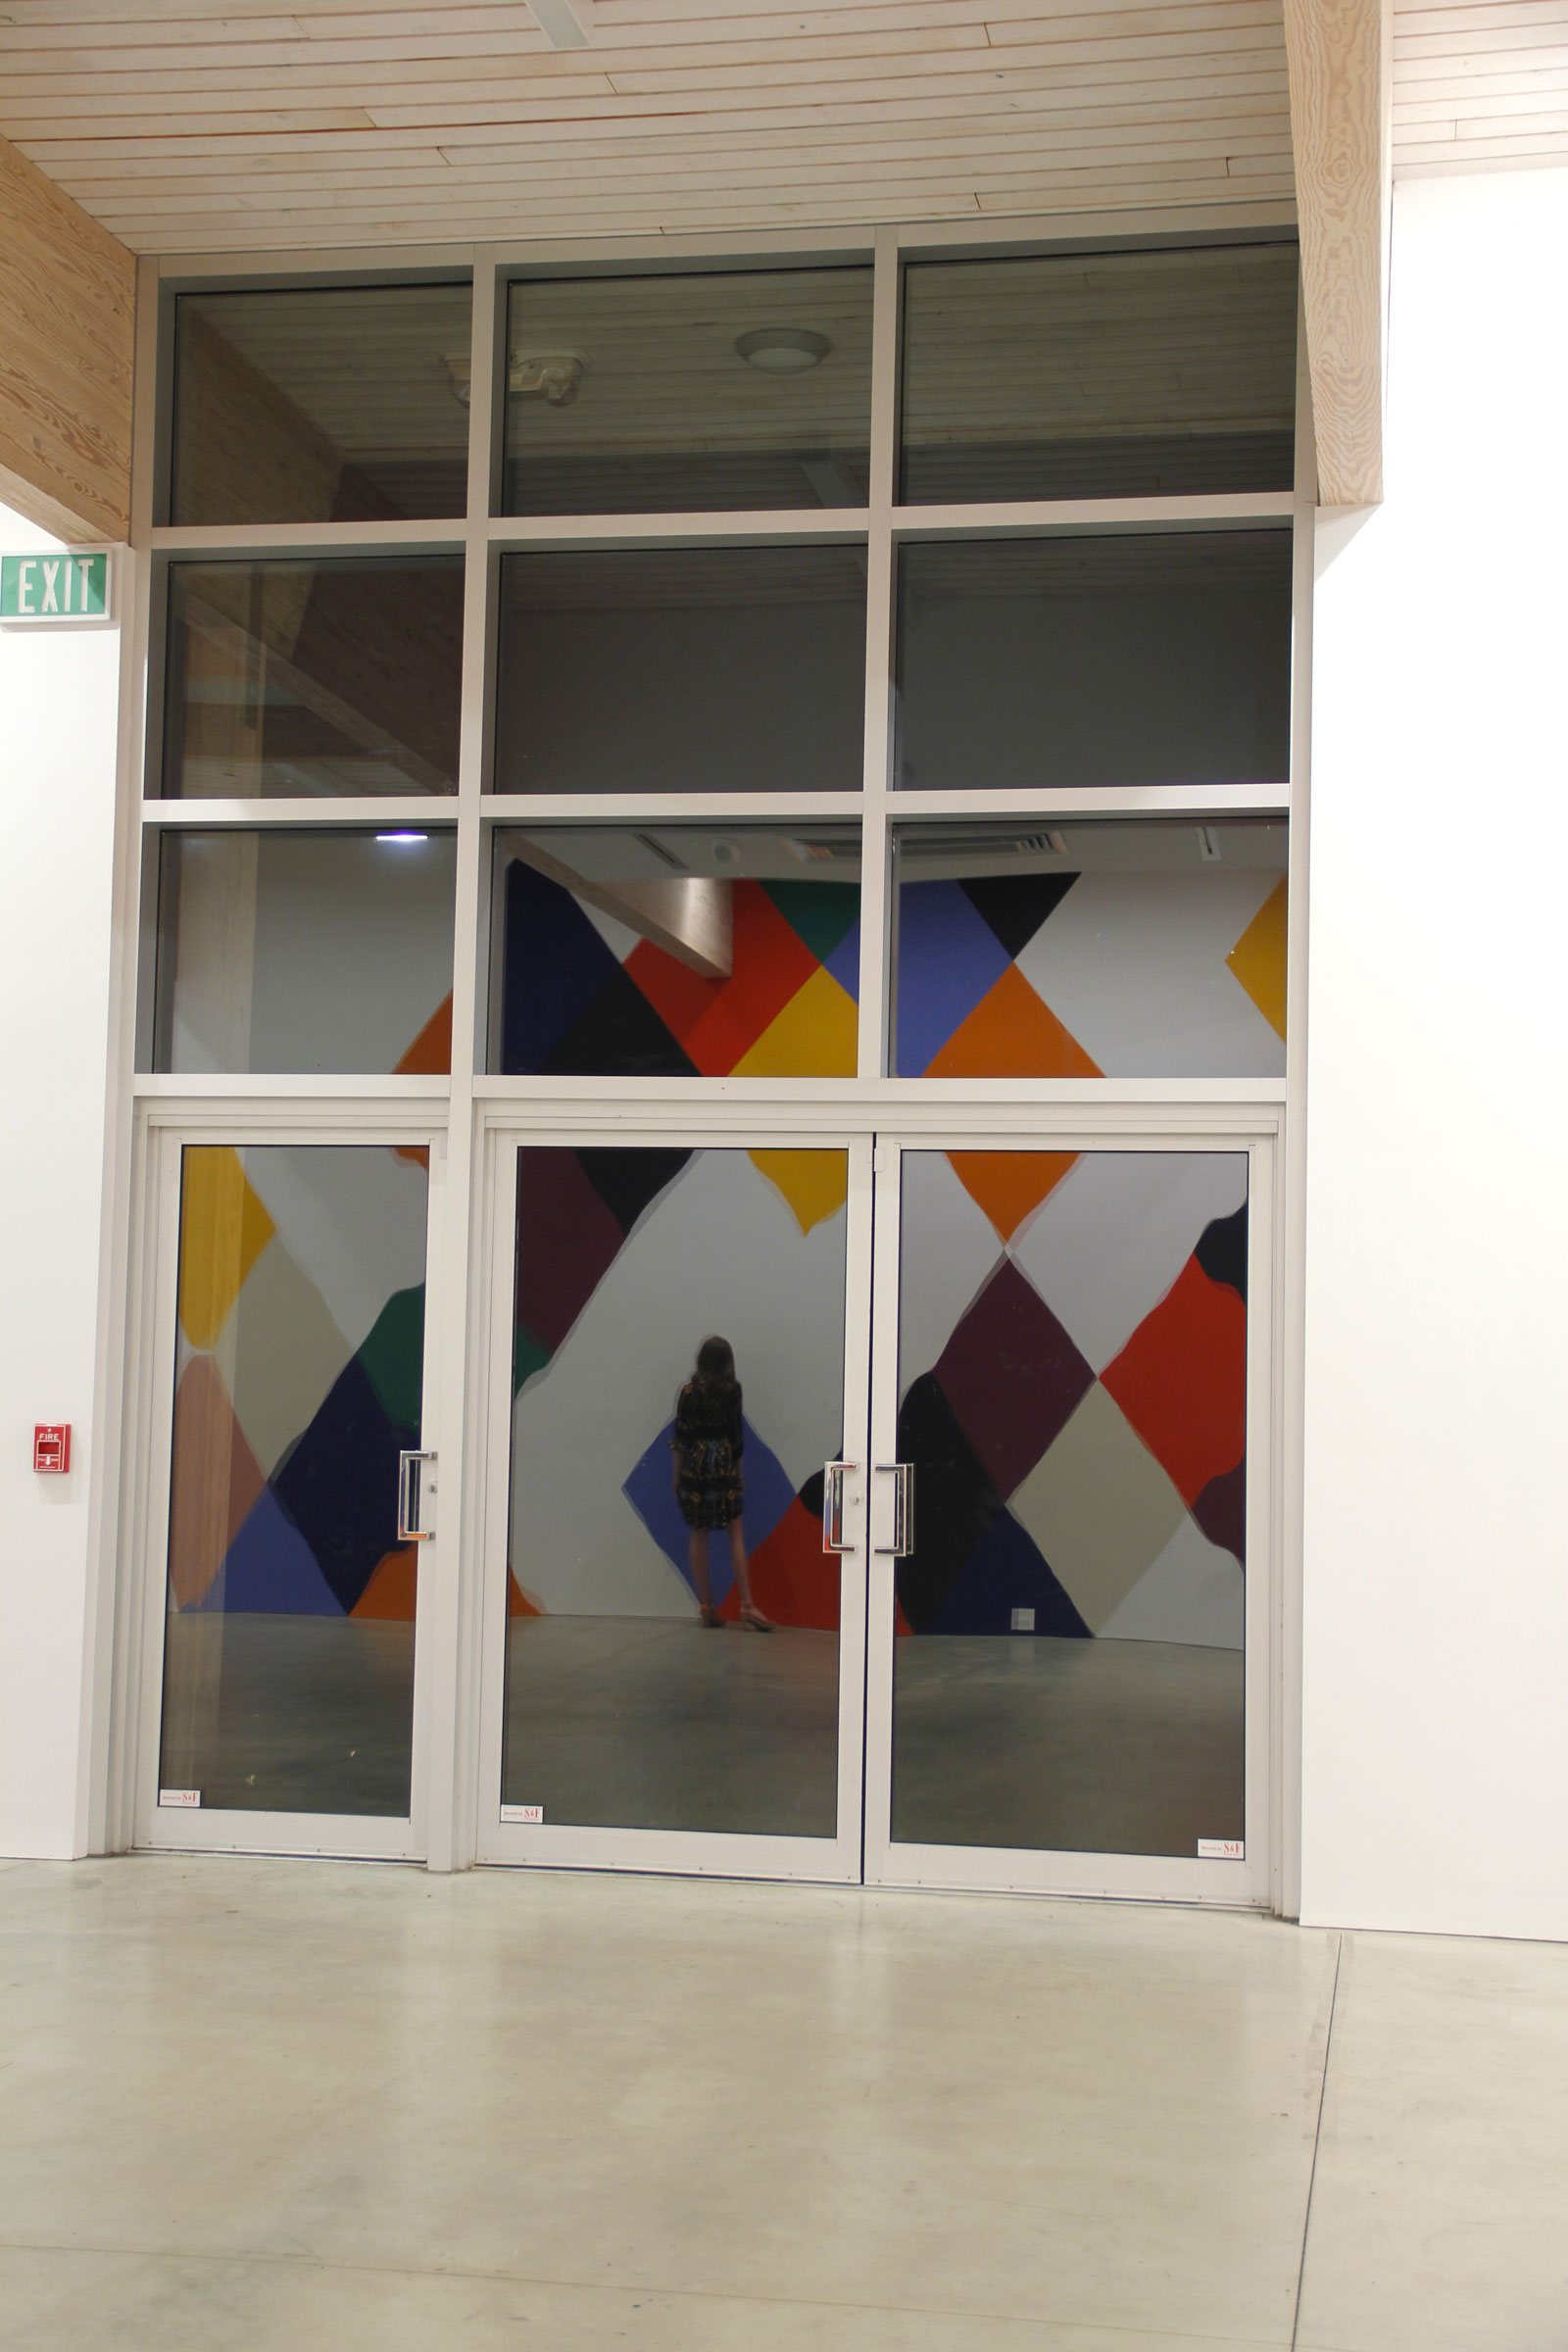   Oracle , 2014, 13 x 26’, wall painting  Canterbury , 2014, 15 x 75’, wall painting OMI International Arts Center, Ghent, New York.&nbsp;On view June-September 2014. 